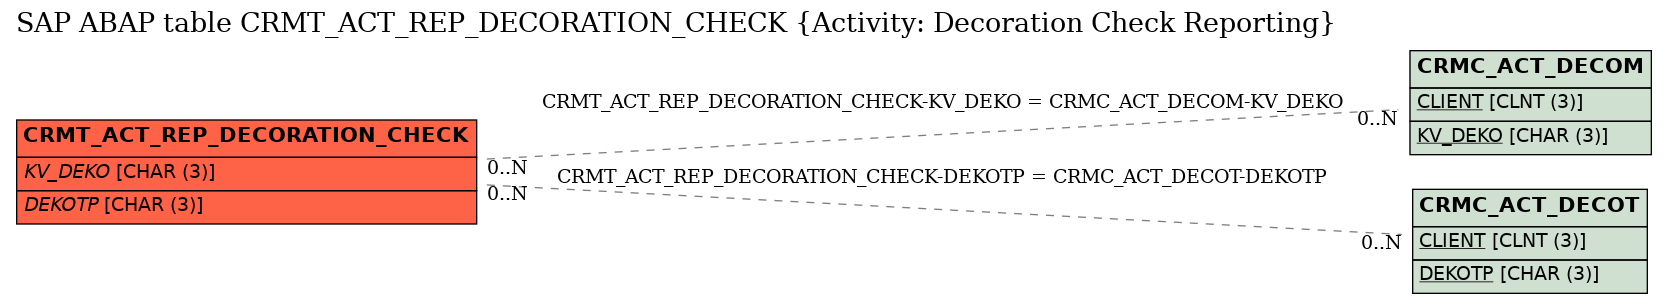 E-R Diagram for table CRMT_ACT_REP_DECORATION_CHECK (Activity: Decoration Check Reporting)